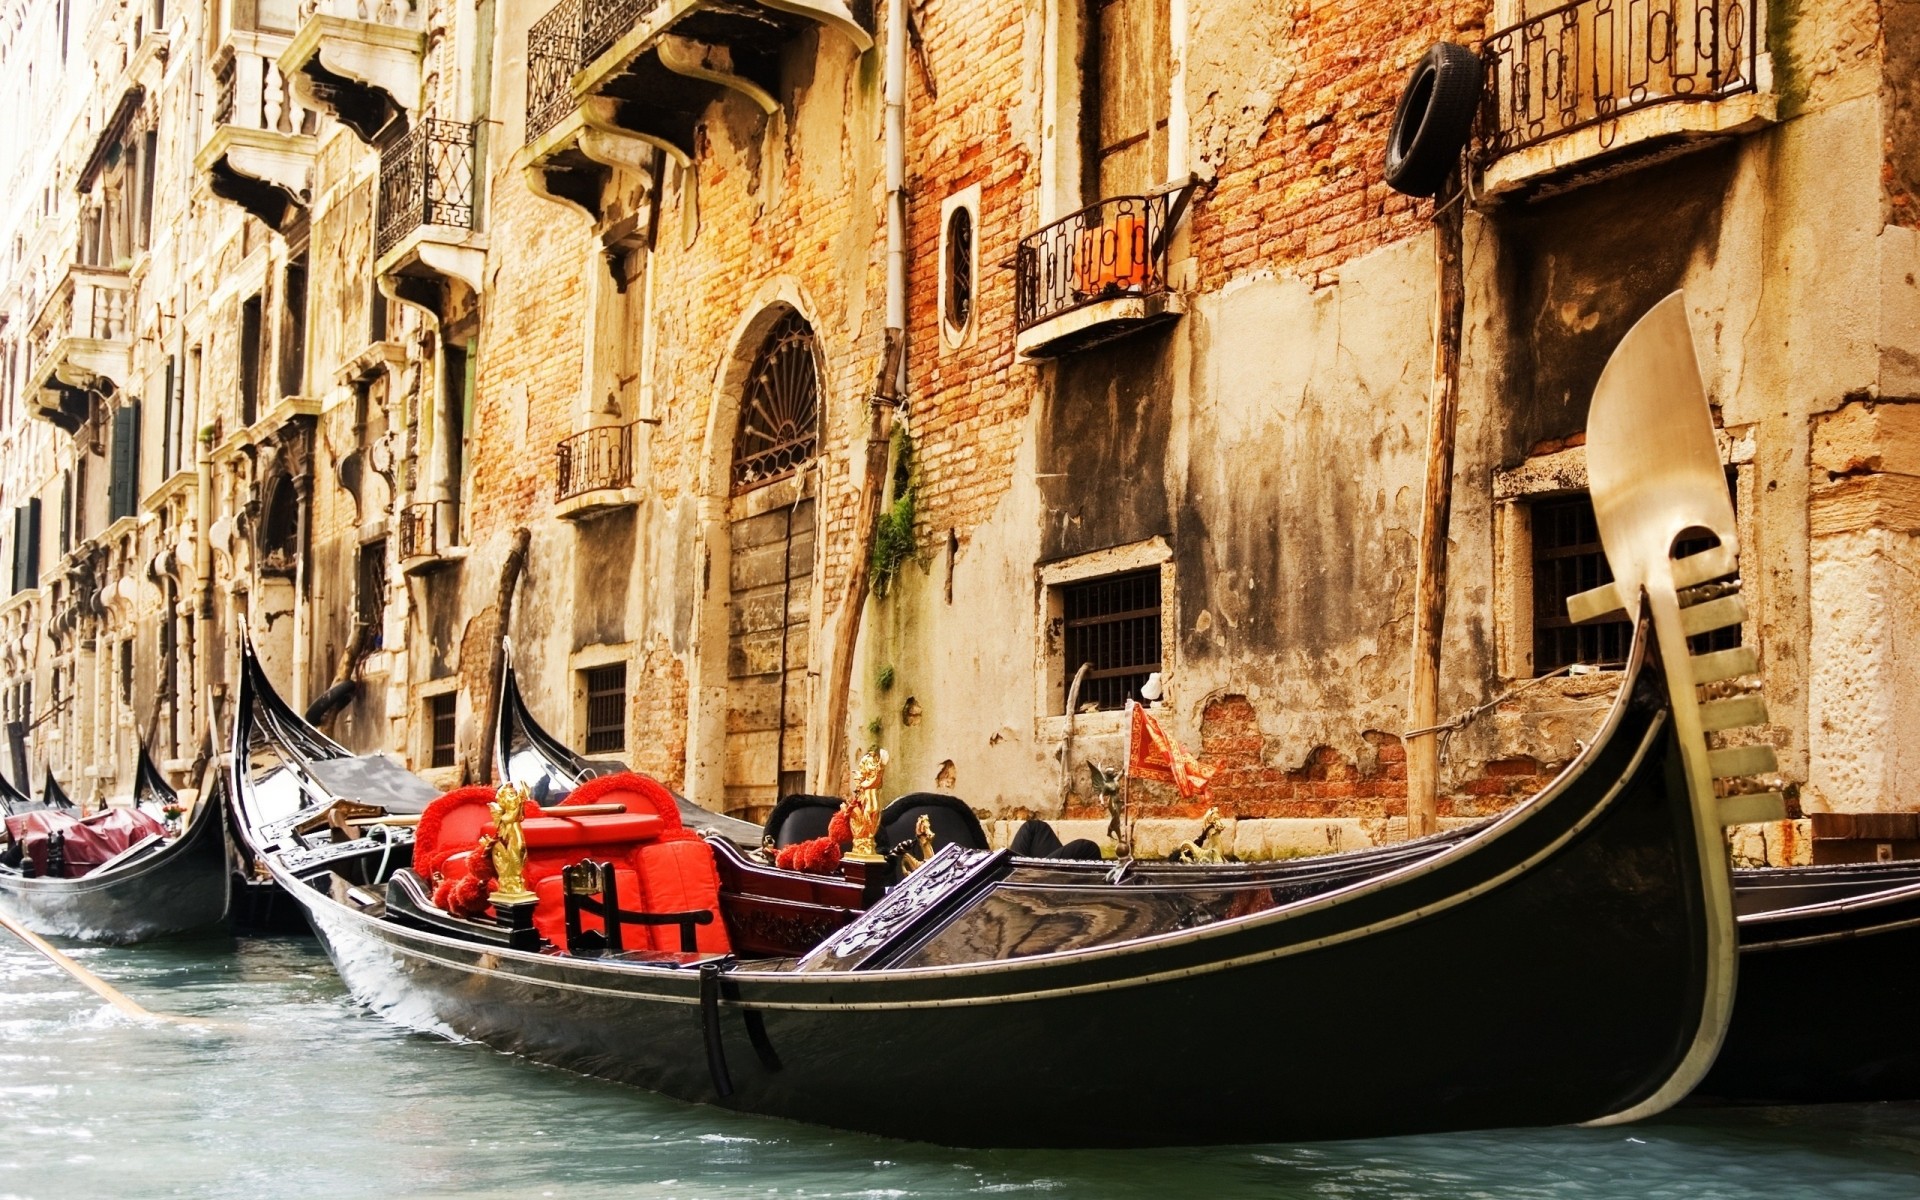 italy gondola venetian canal gondolier boat travel tourism old water city town transmit traditional transportation system architecture building tourist vacation street world